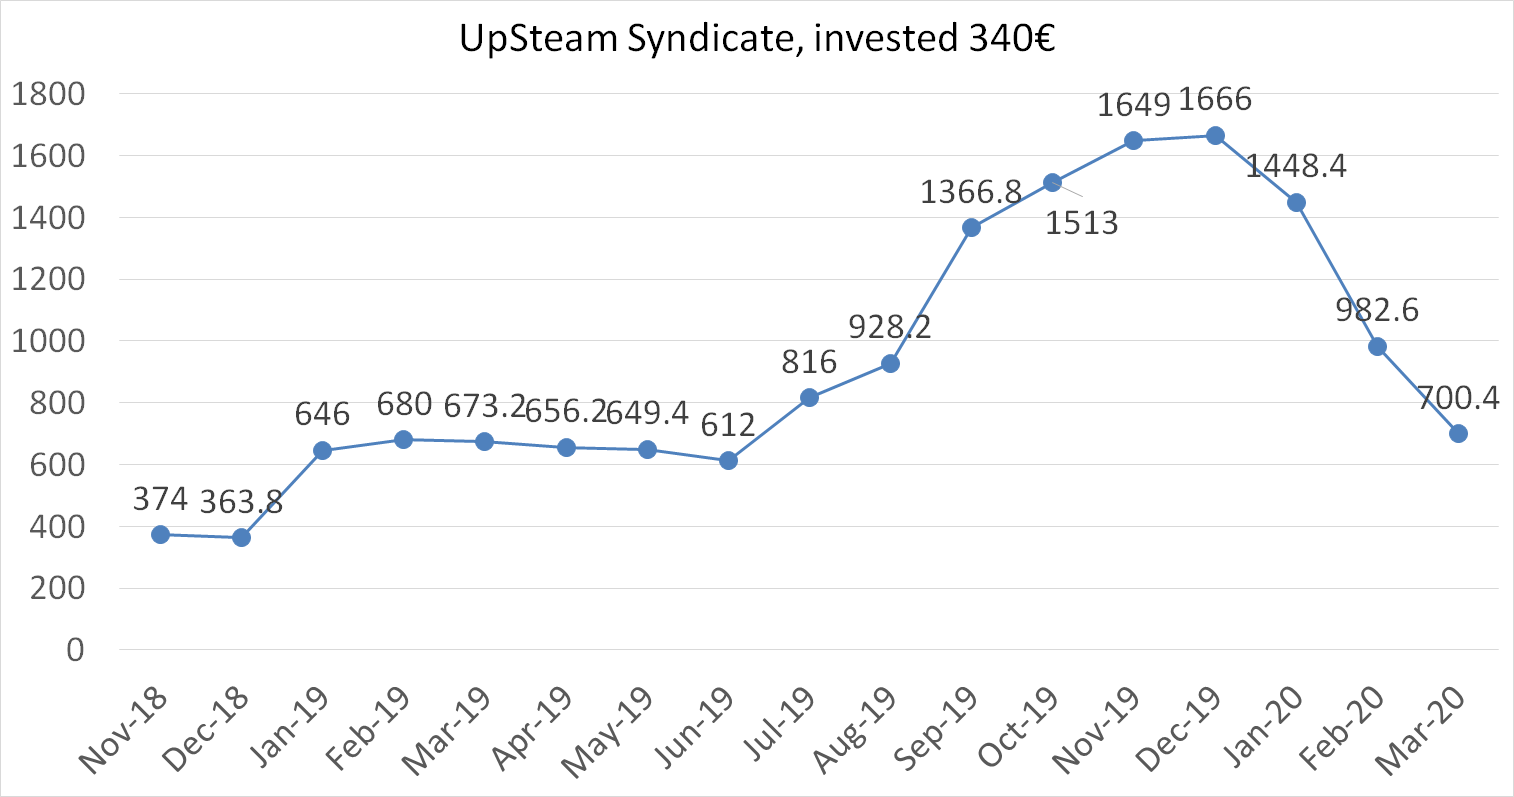 UpSteam syndicate, invested 340 worth in march 2020